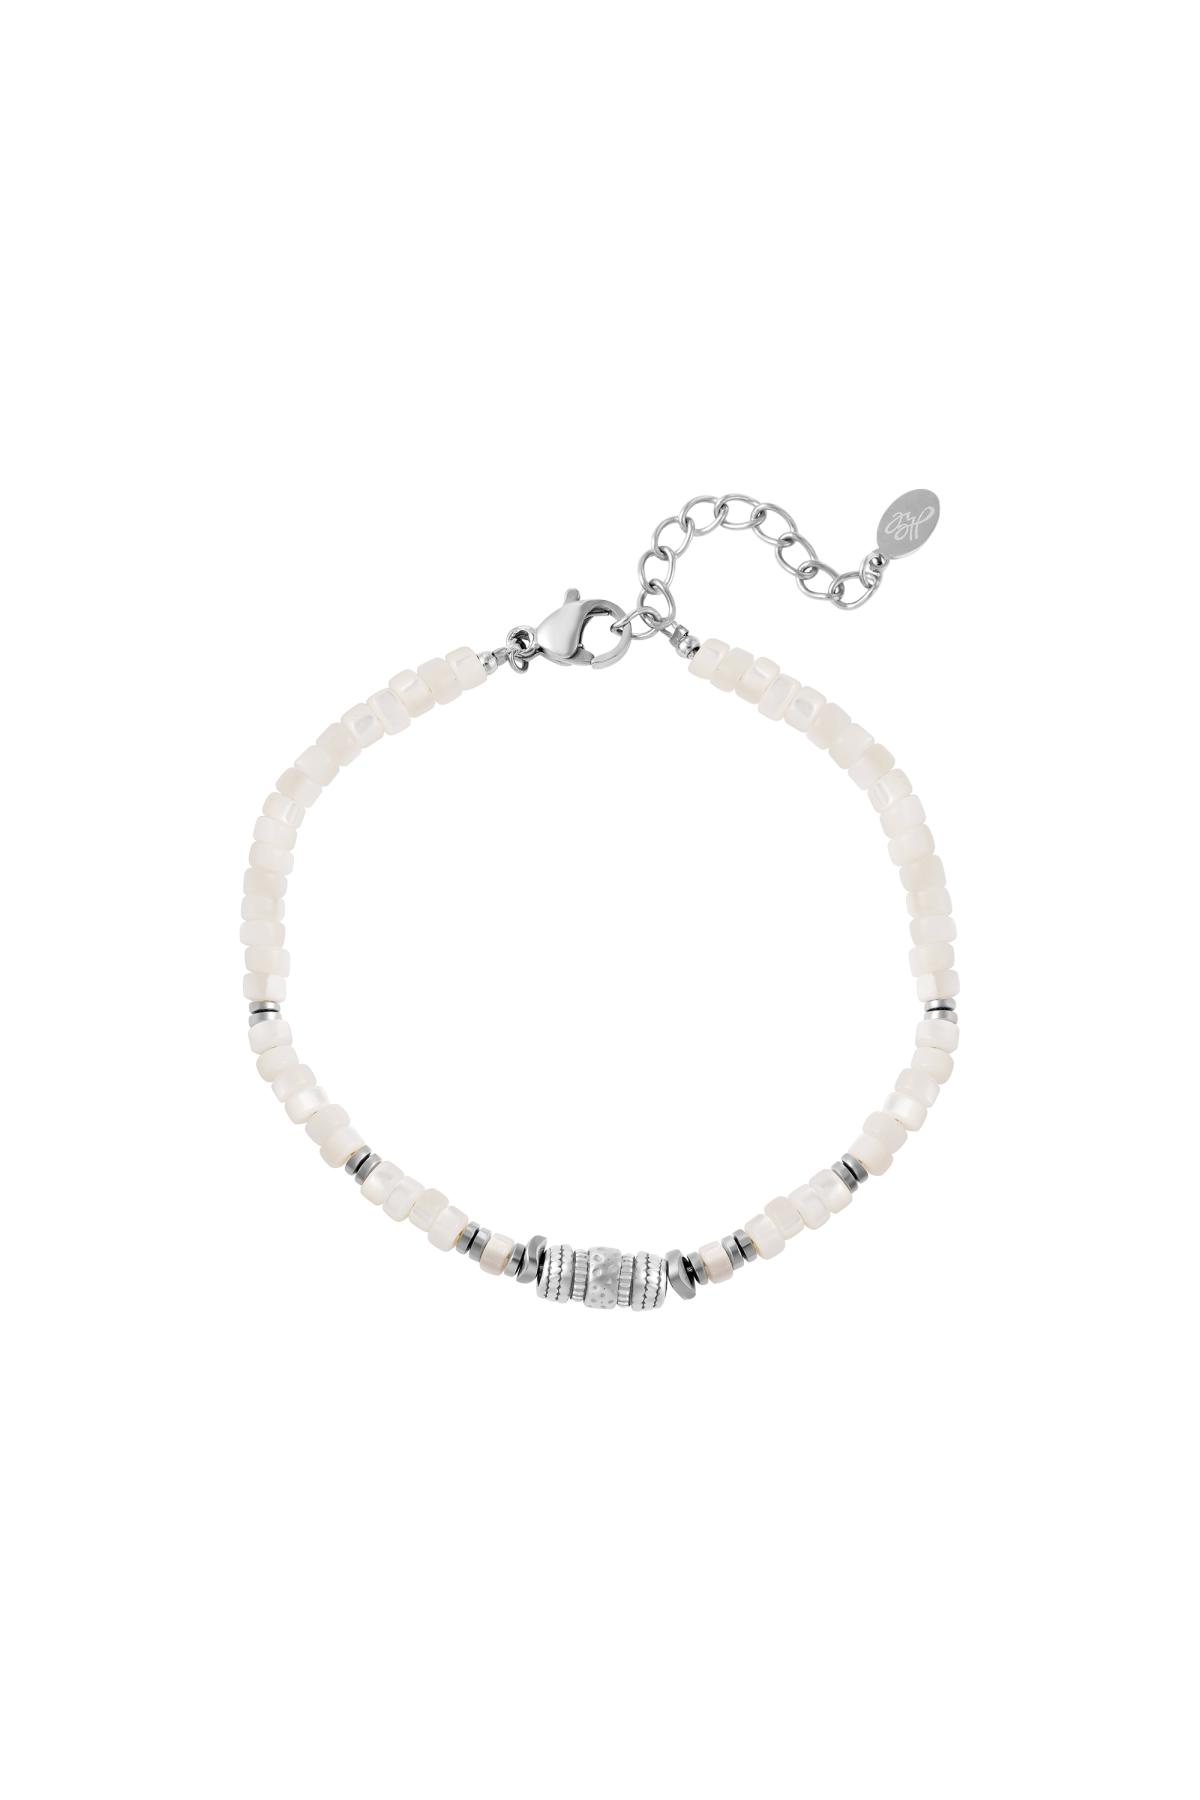 Bracelet with white beads Silver Stainless Steel 